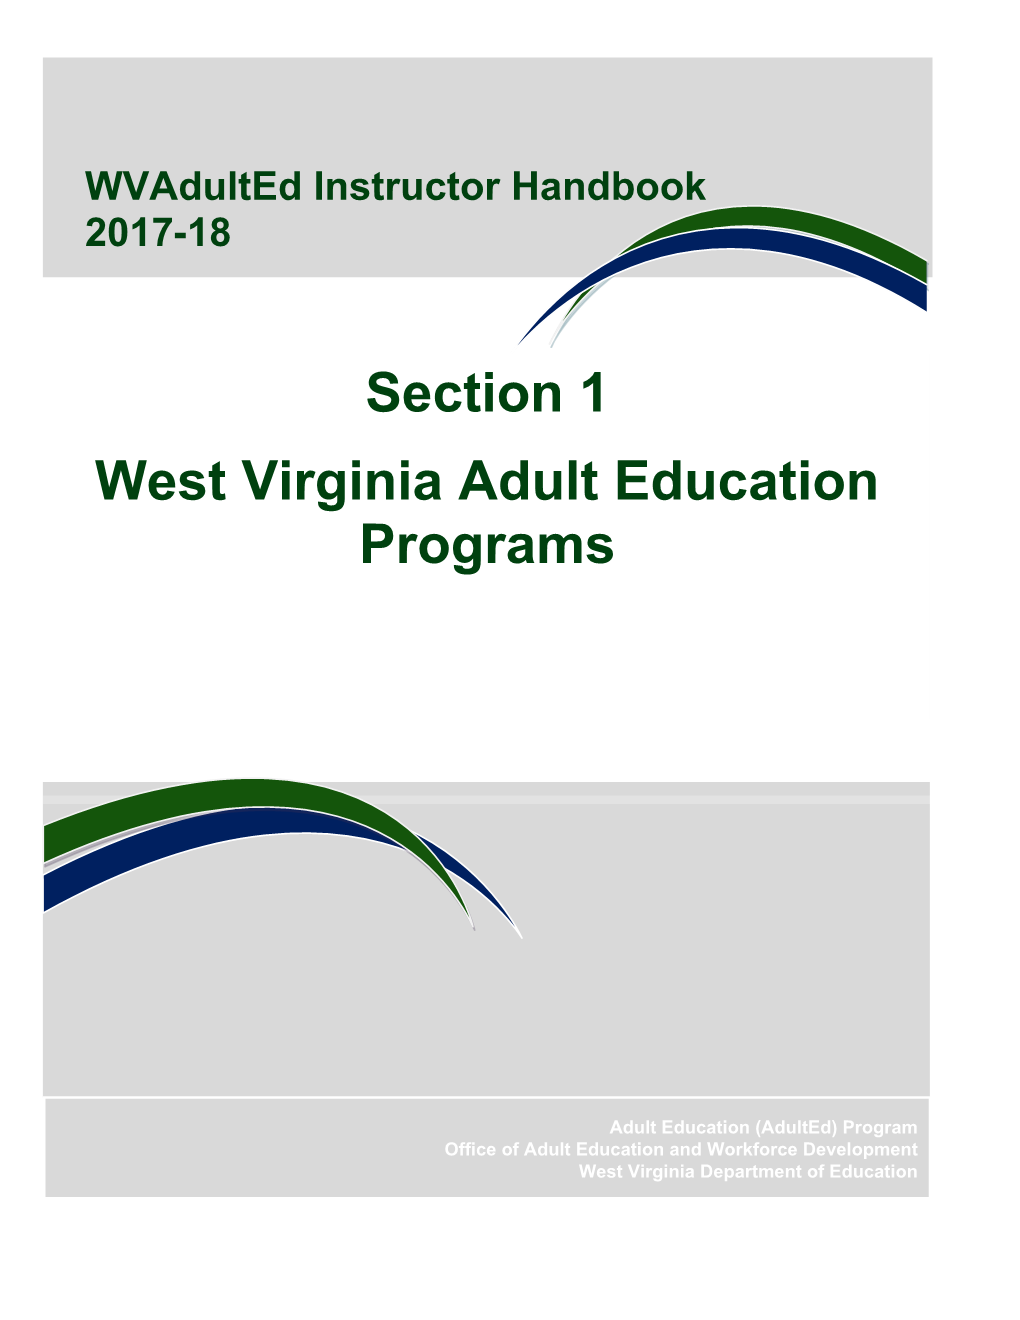 West Virginia Adult Education: Programsand Resources